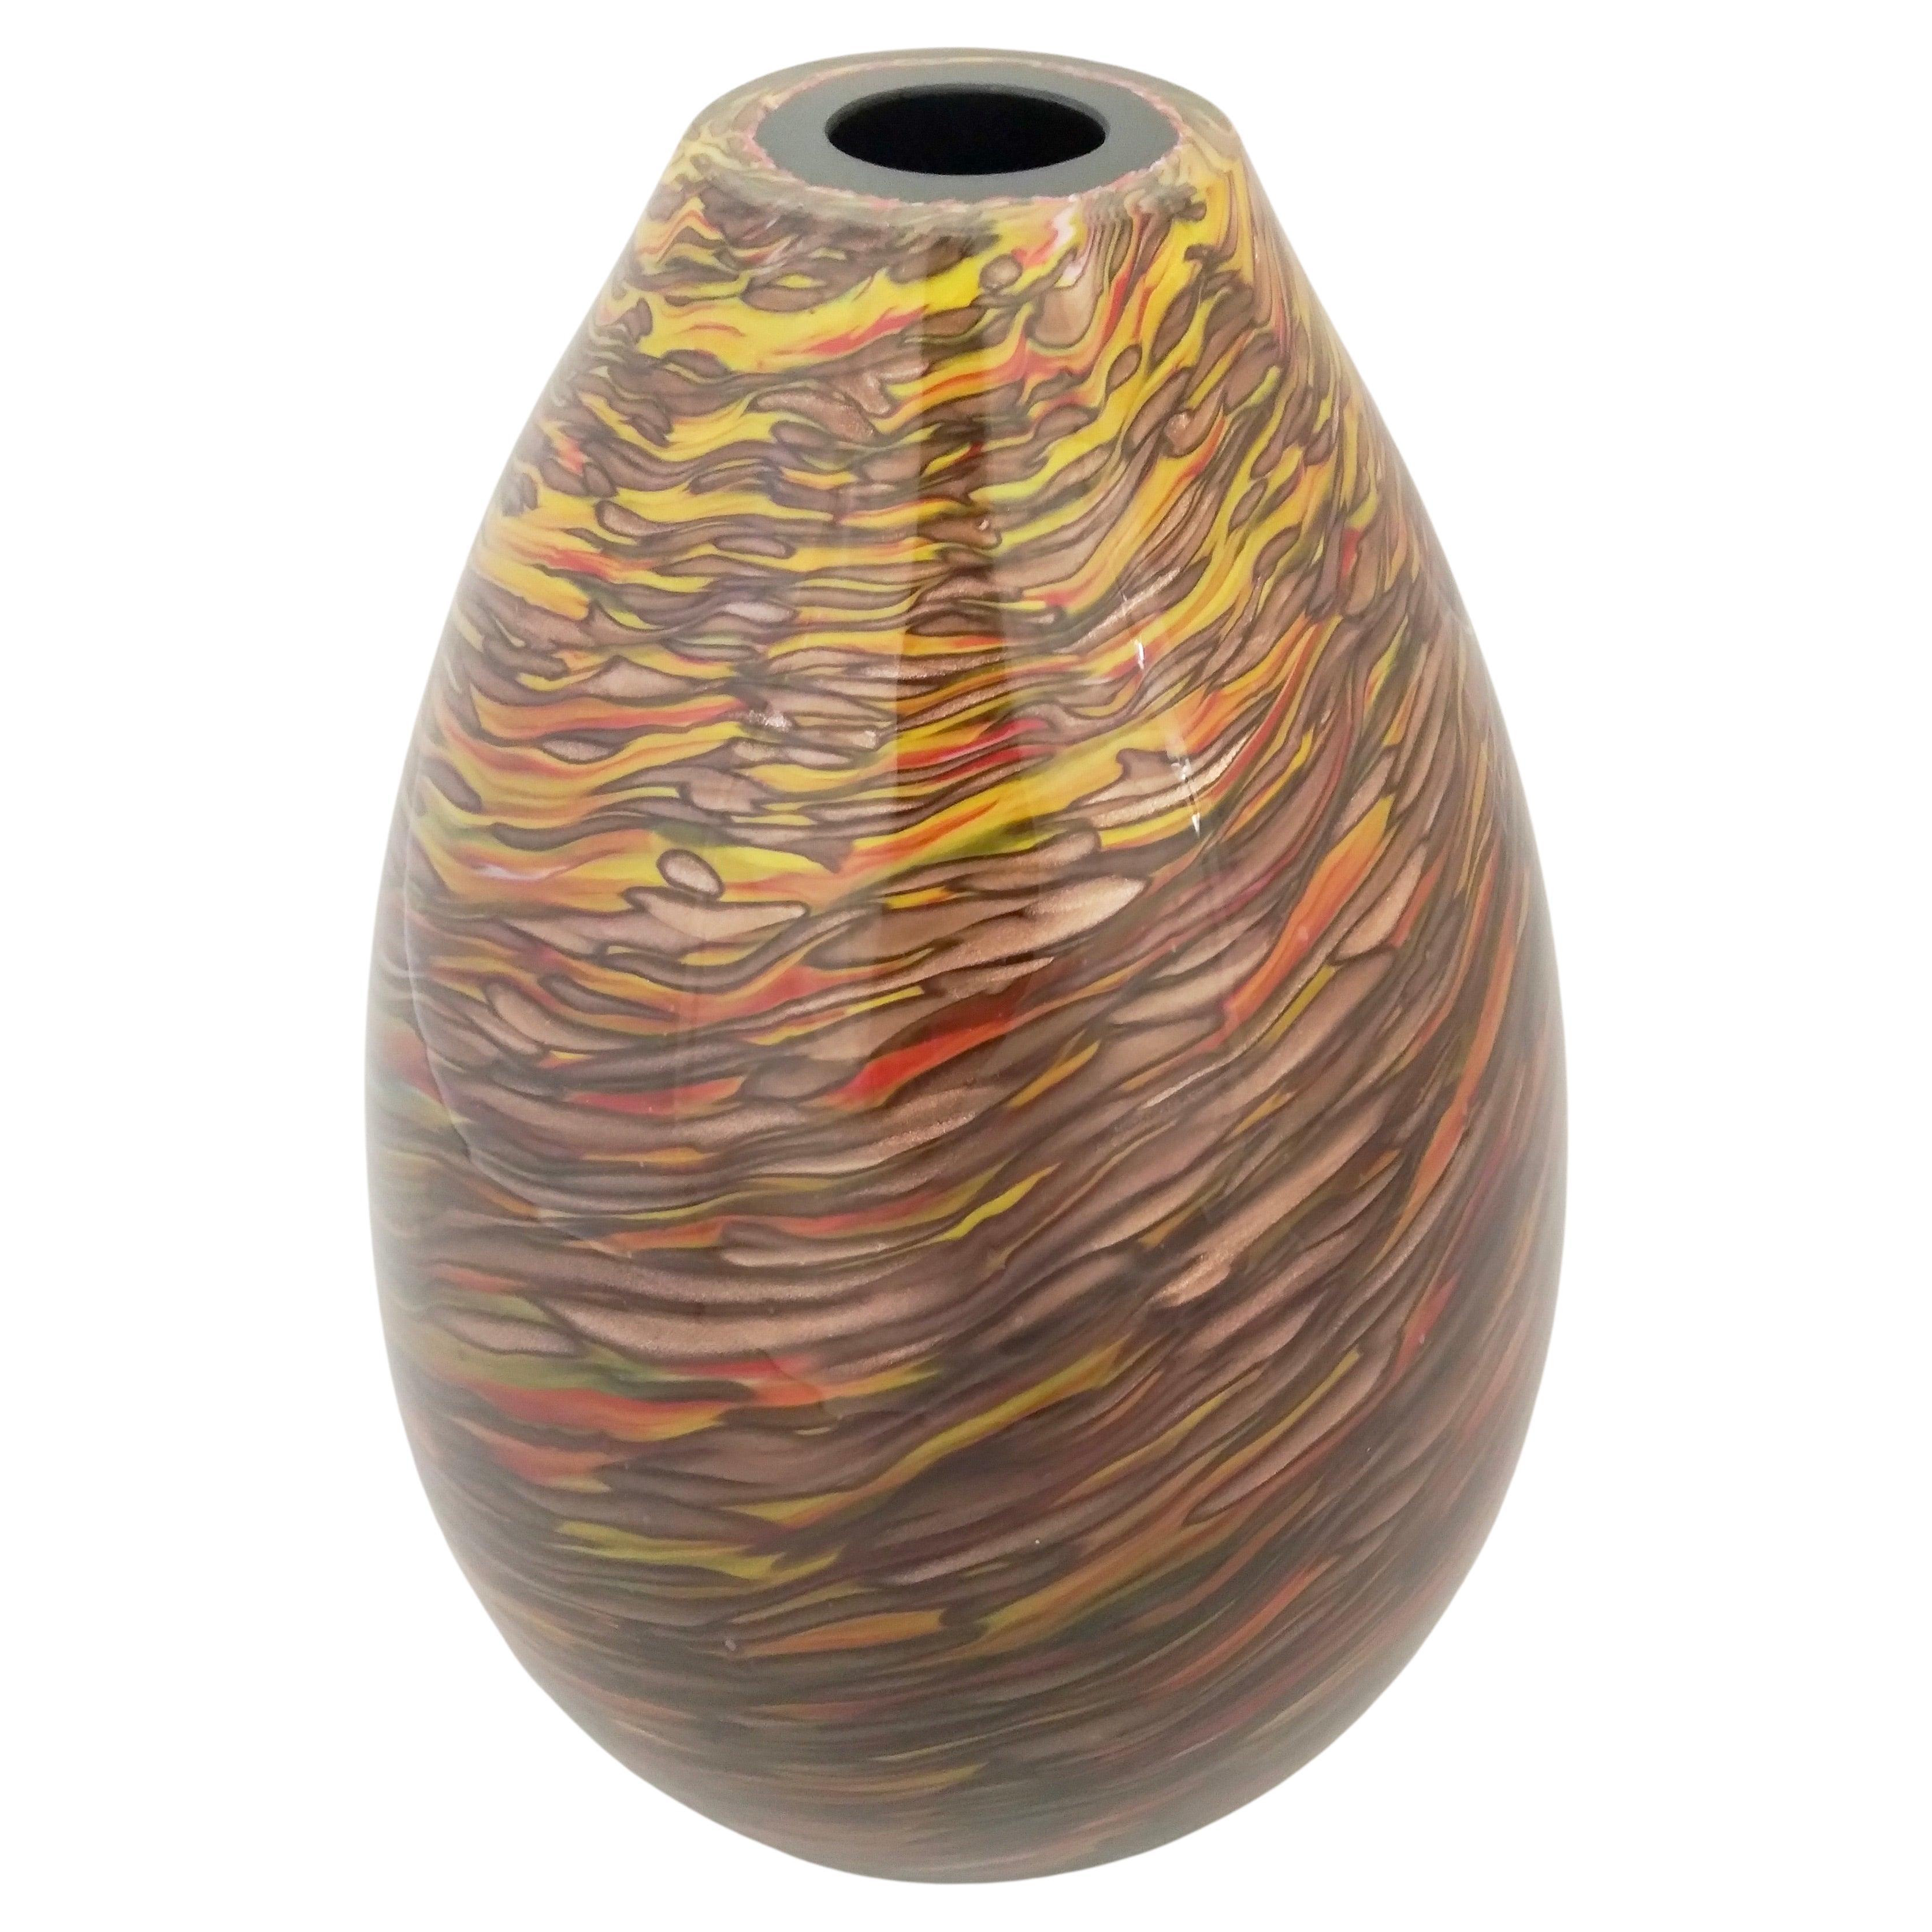 Formia 1980s Modern Ovoid Brown Yellow Red Orange Gold Murano Glass Vase